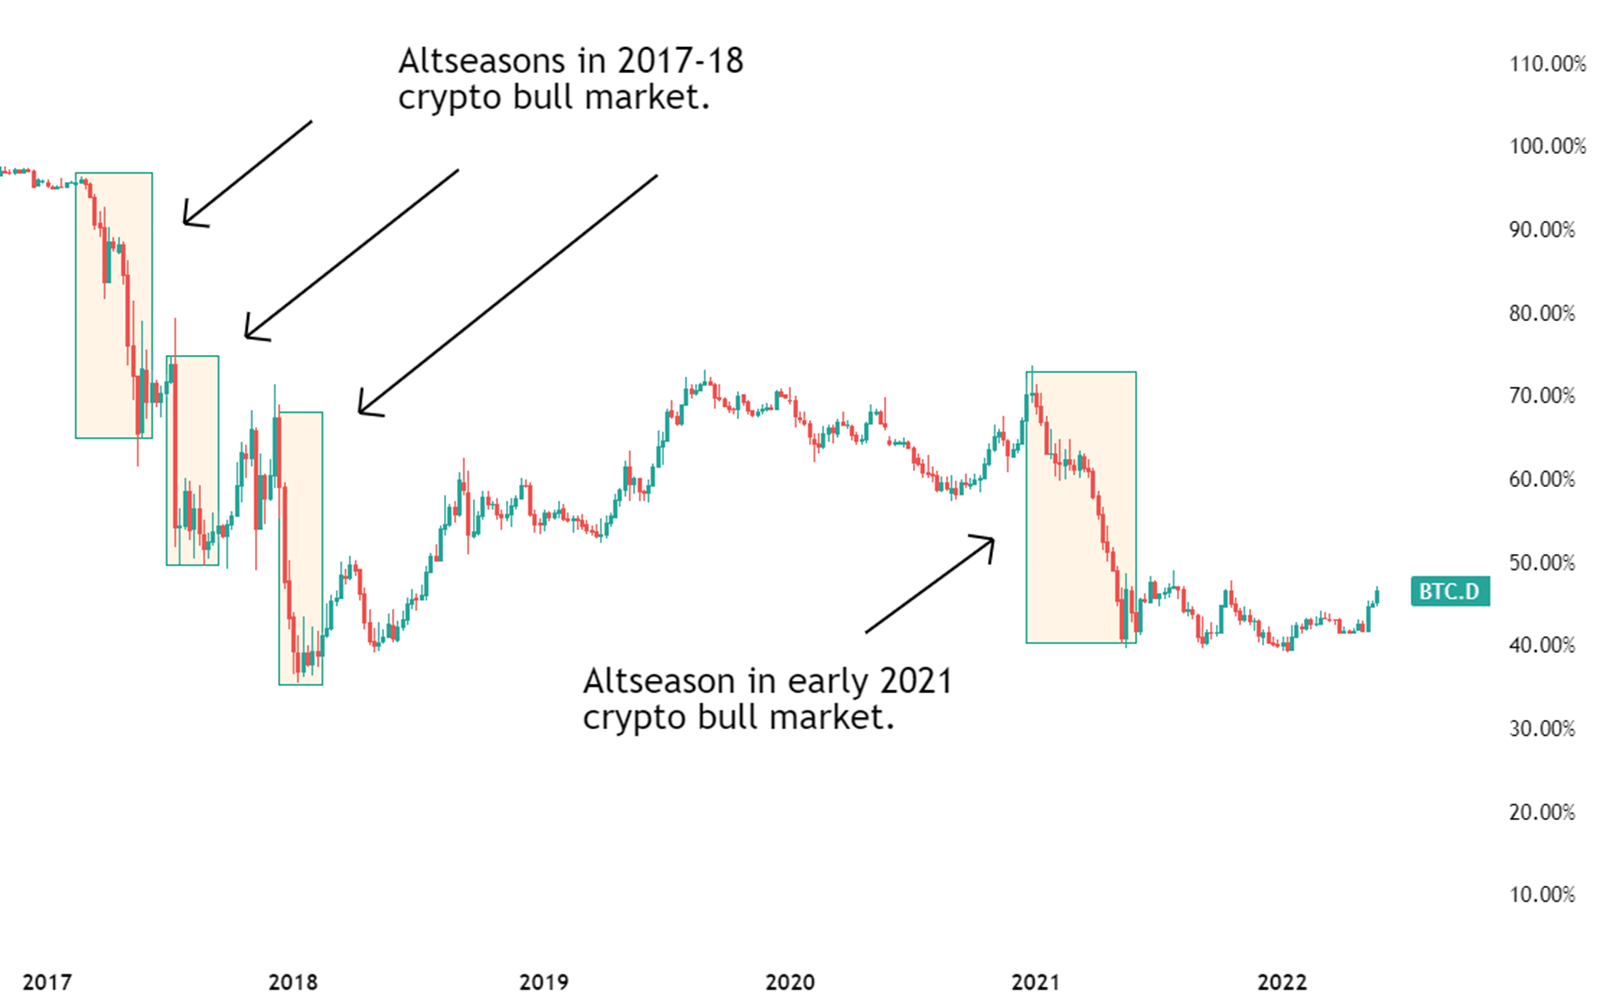 Bitcoin dominance chart (BTC.D) showing previous altcoin seasons. Chart drawn with TradingView.